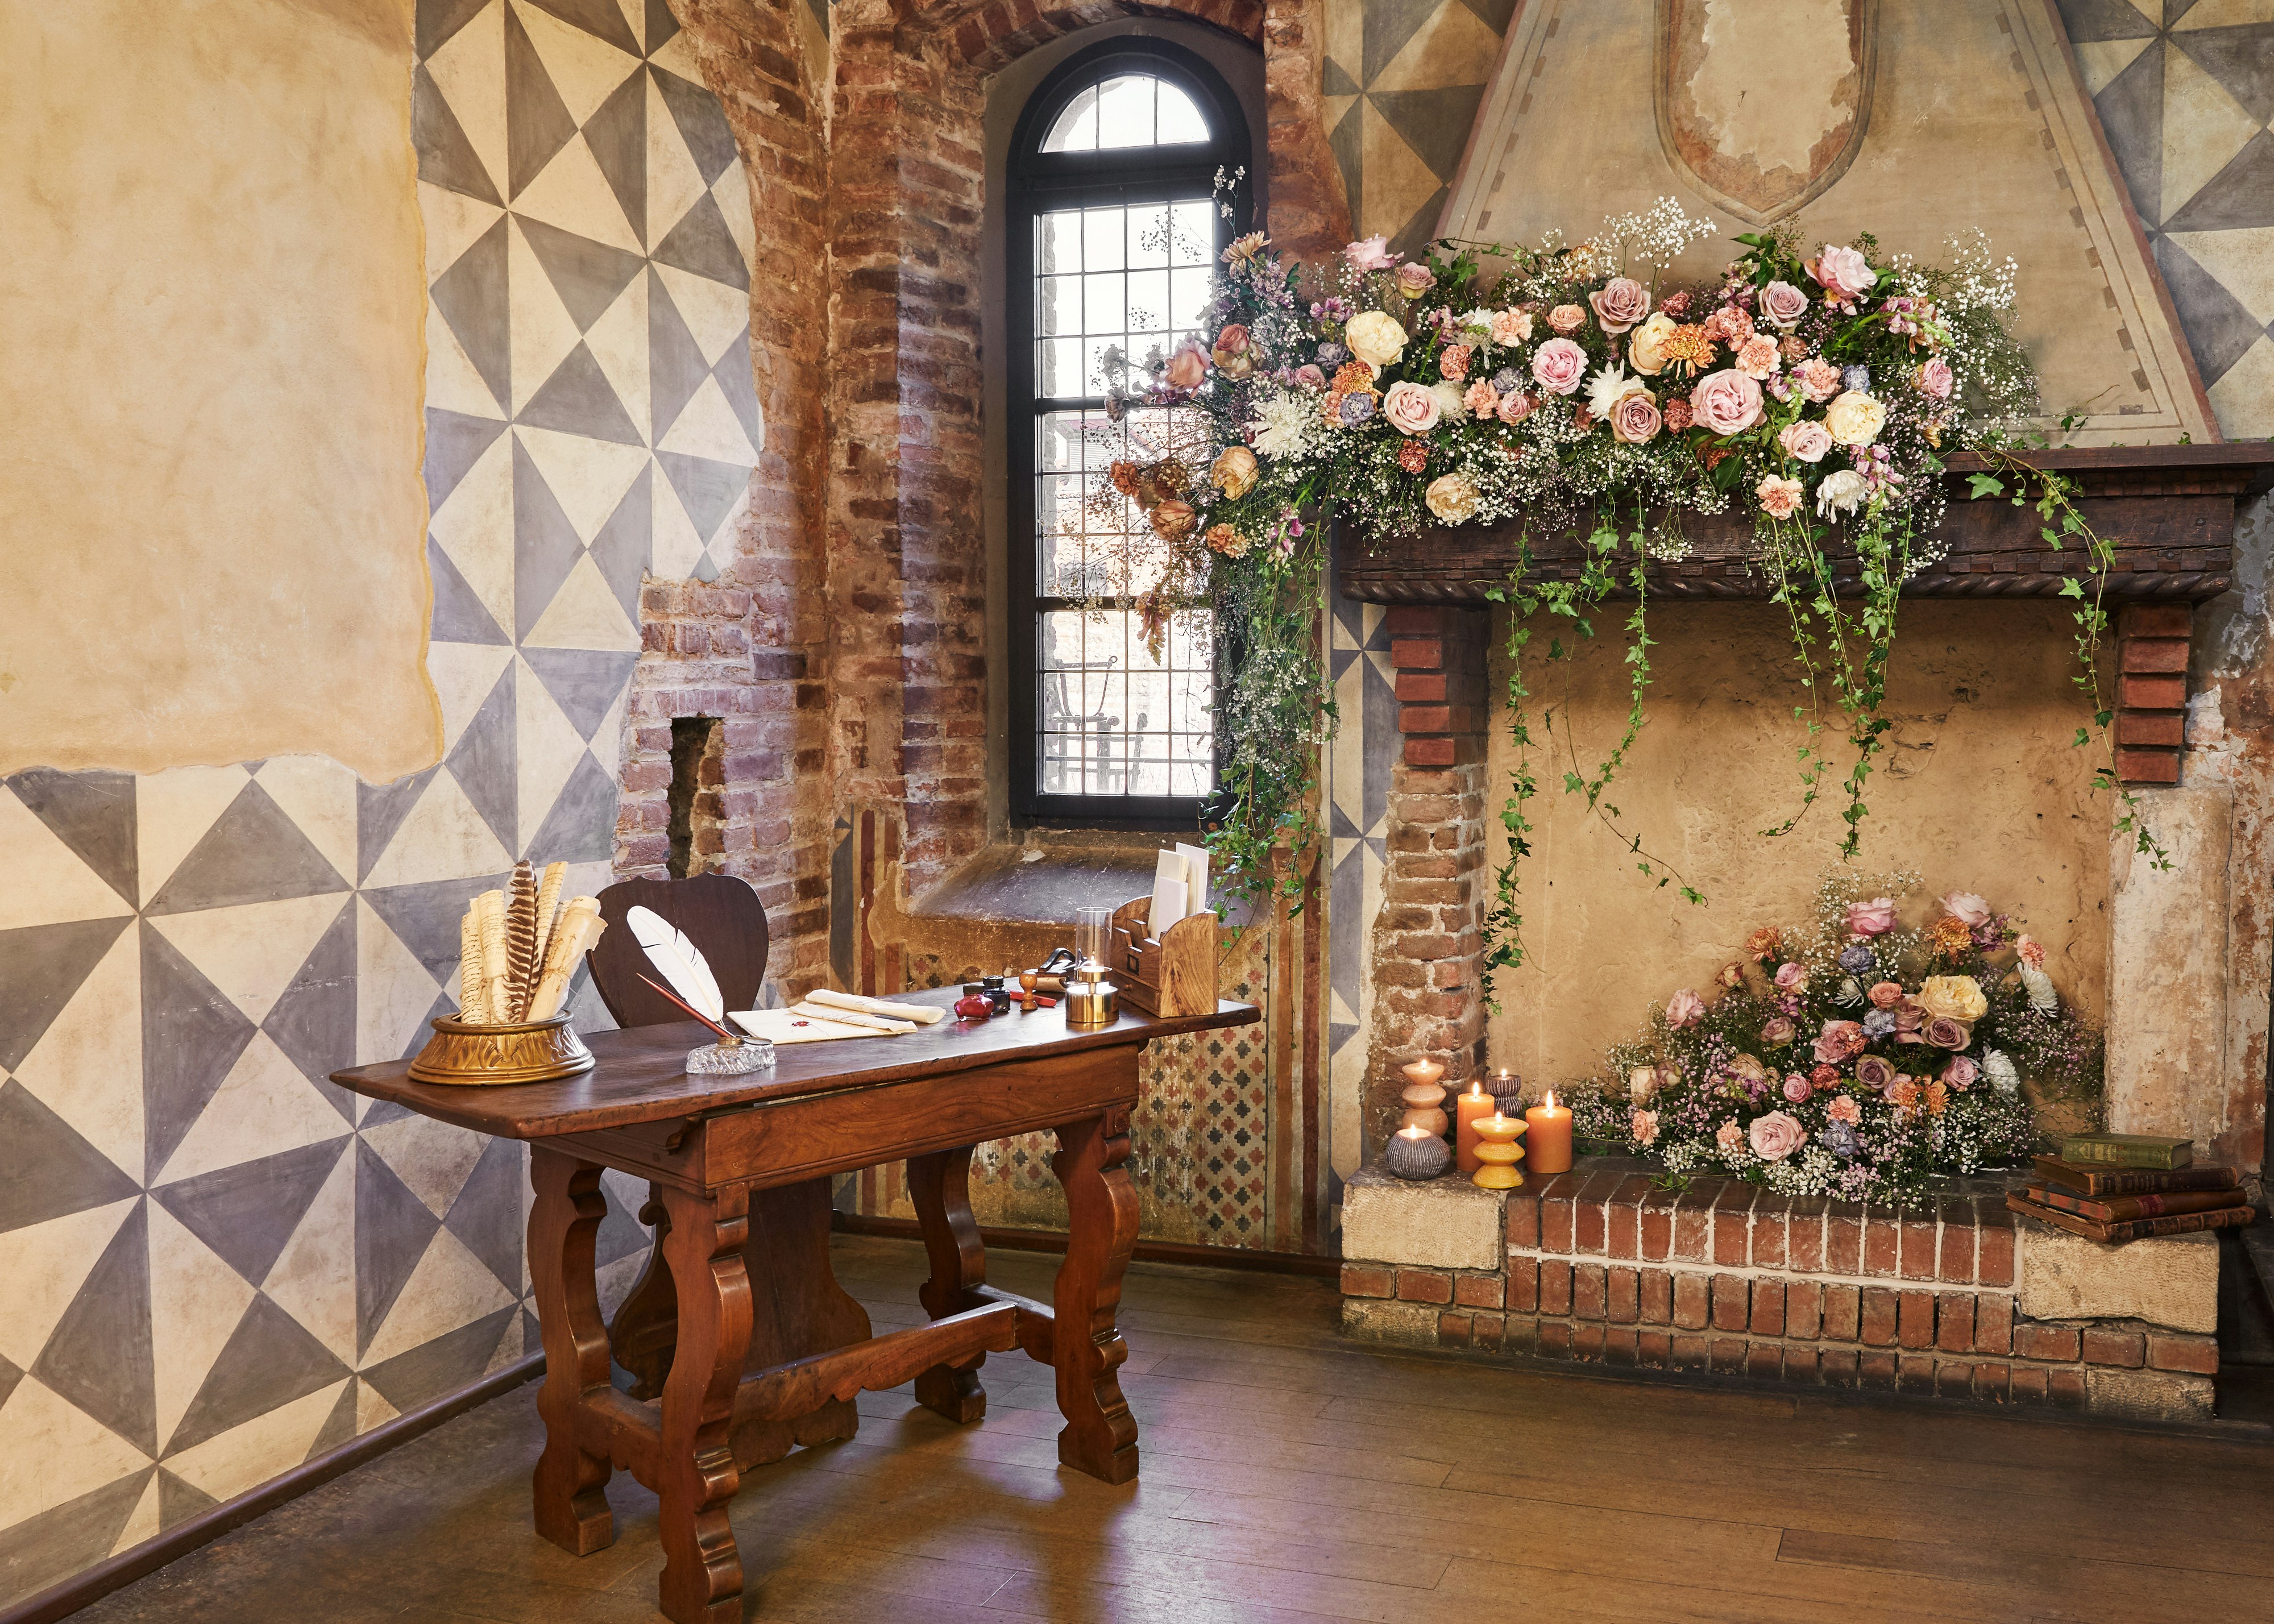 A wooden writing desk beside a flower-covered stone fireplace